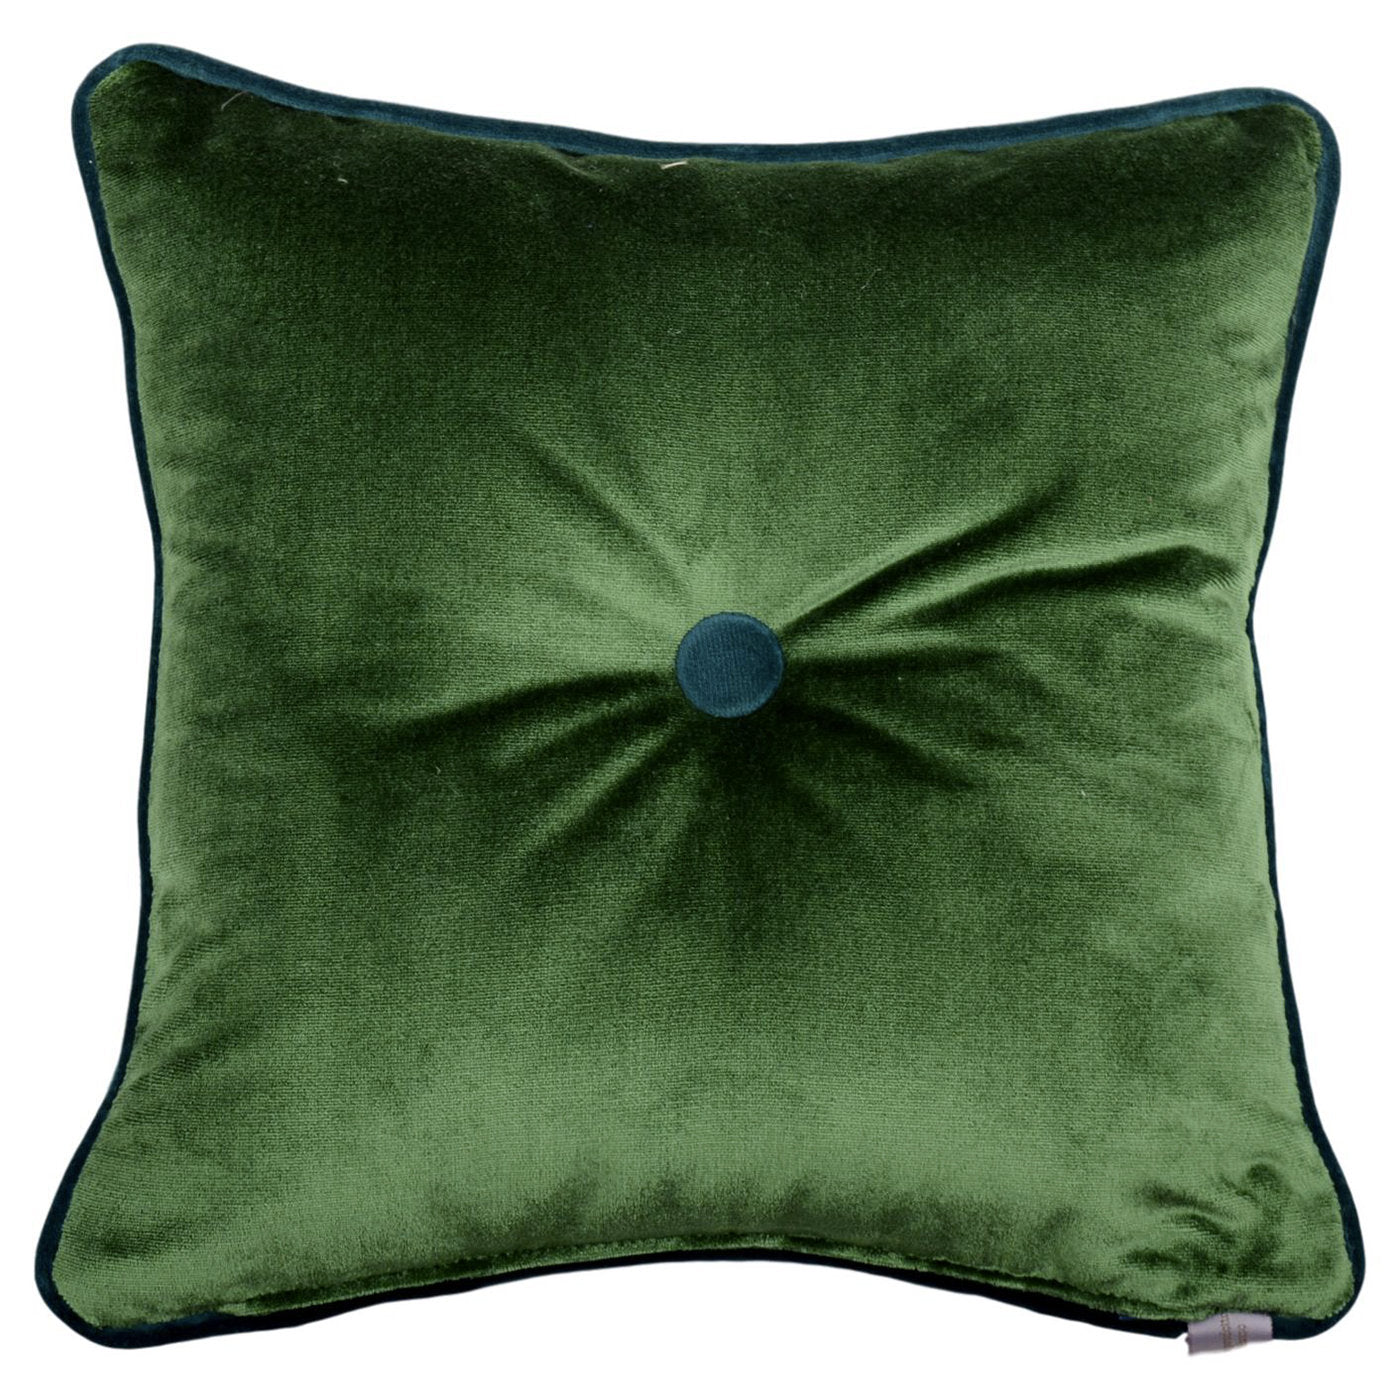 Emerald Carré Cushion in striped jacquard fabric and silk velvet - Alternative view 1